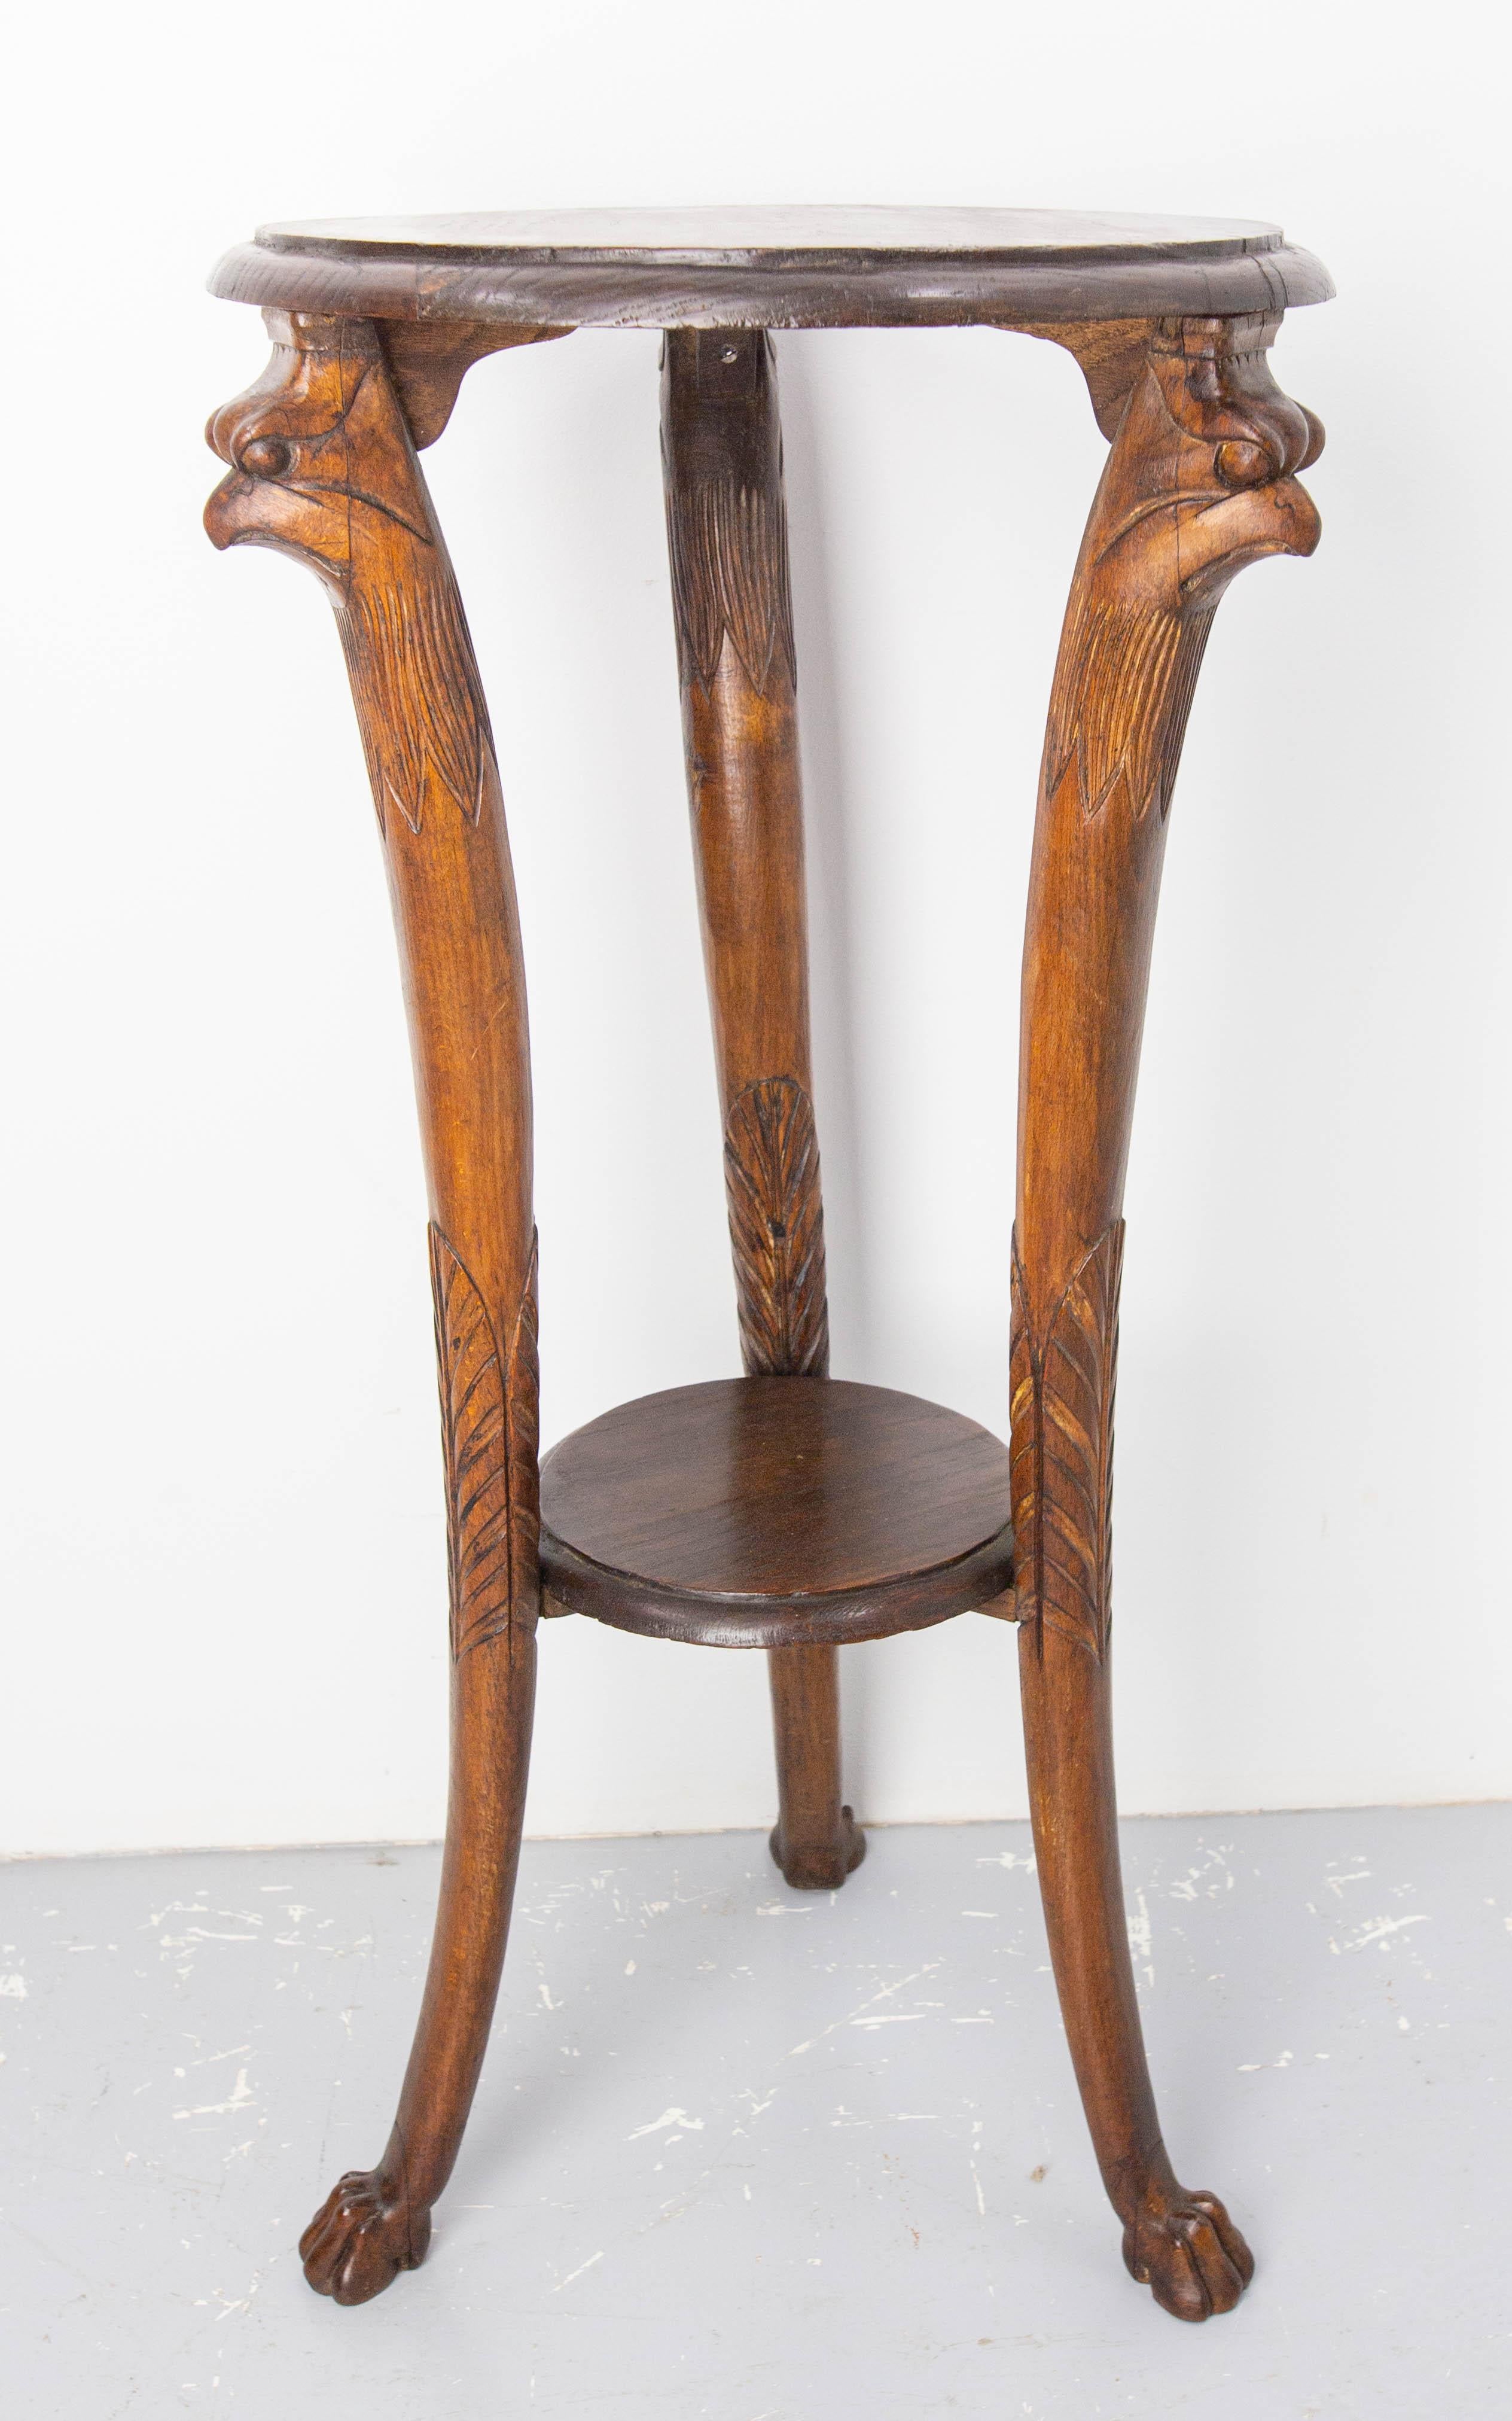 This plant holder or sellette was made in the middle oh the 19th century.
The legs of this harness make this table a unique piece of furniture: at the top, each leg begins with an eagle's head with a severe gaze, which is extended by a collar of